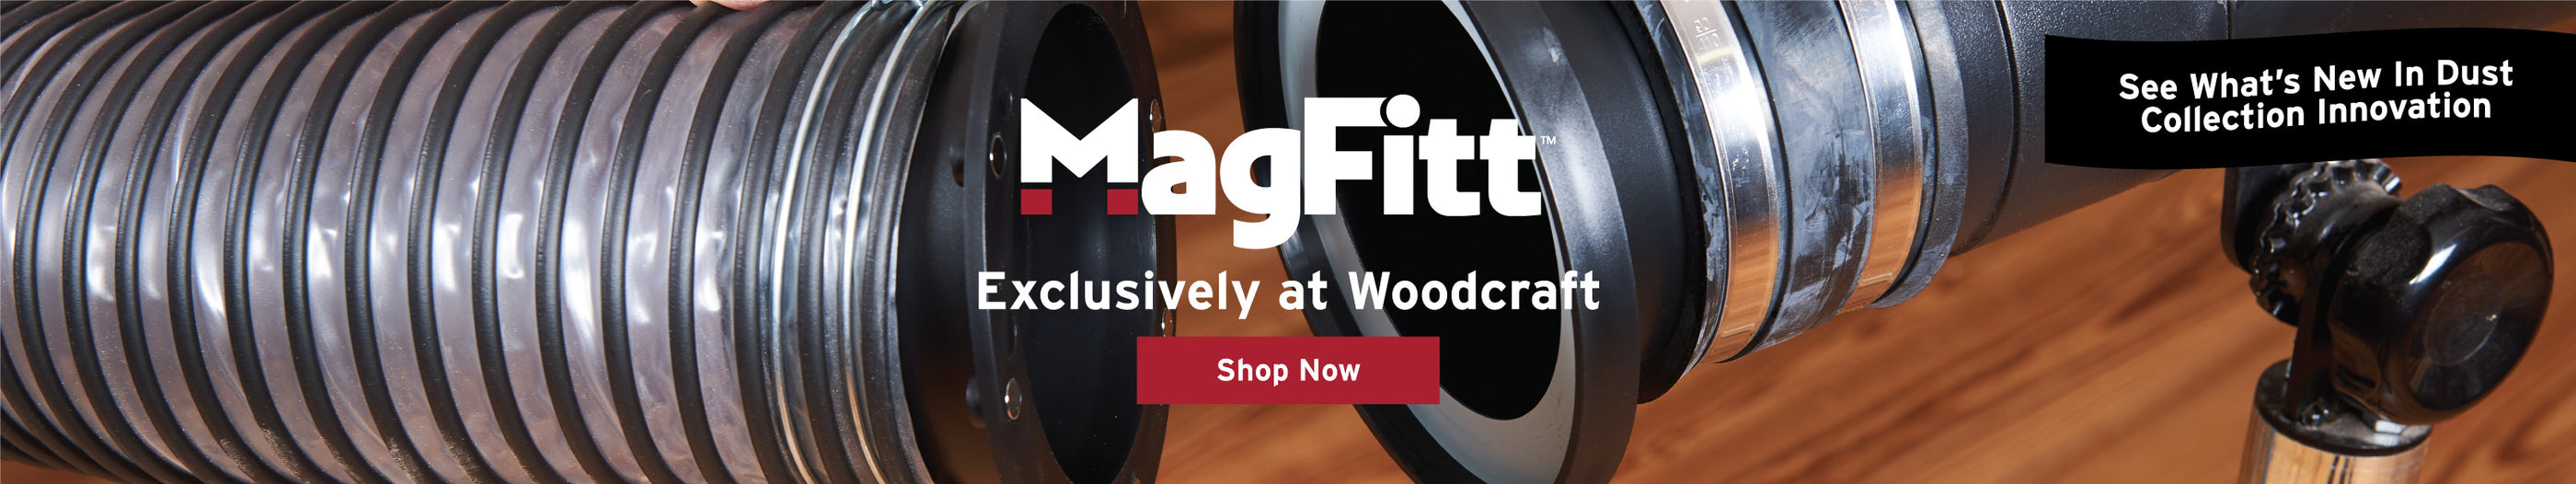 See what's new in dust collection innovation. MagFit exclusively at Woodcraft.